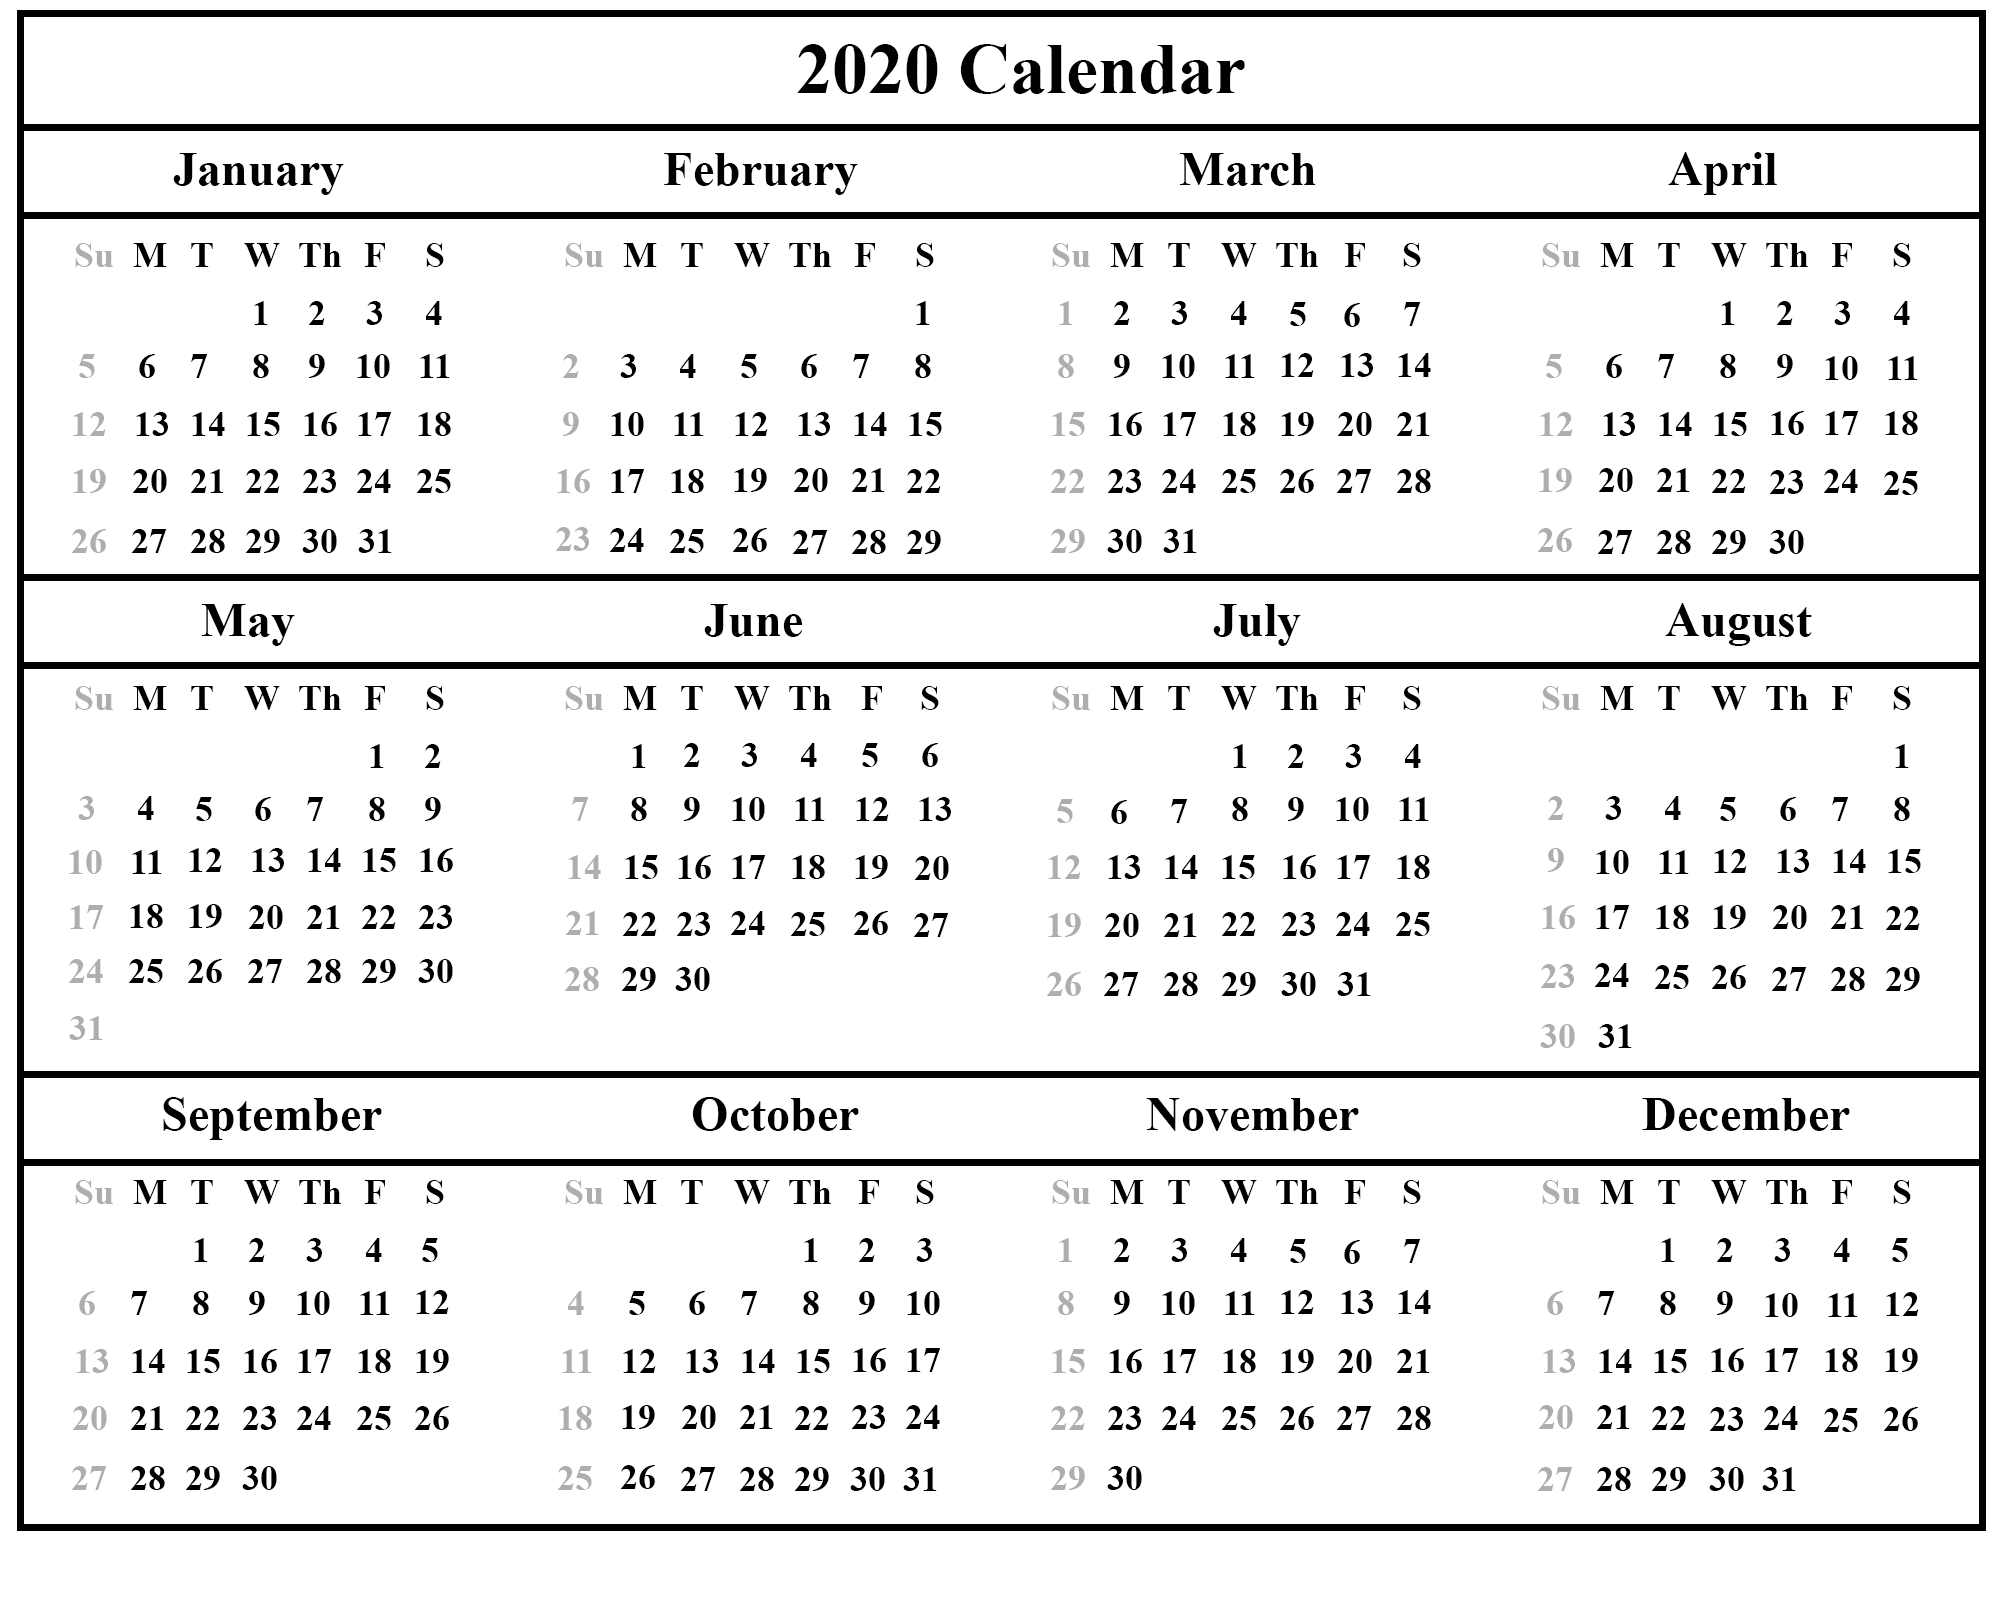 Free Printable Calendar 2020 With Holidays | 12 Month Free Printable Calenders With Legal Holidays